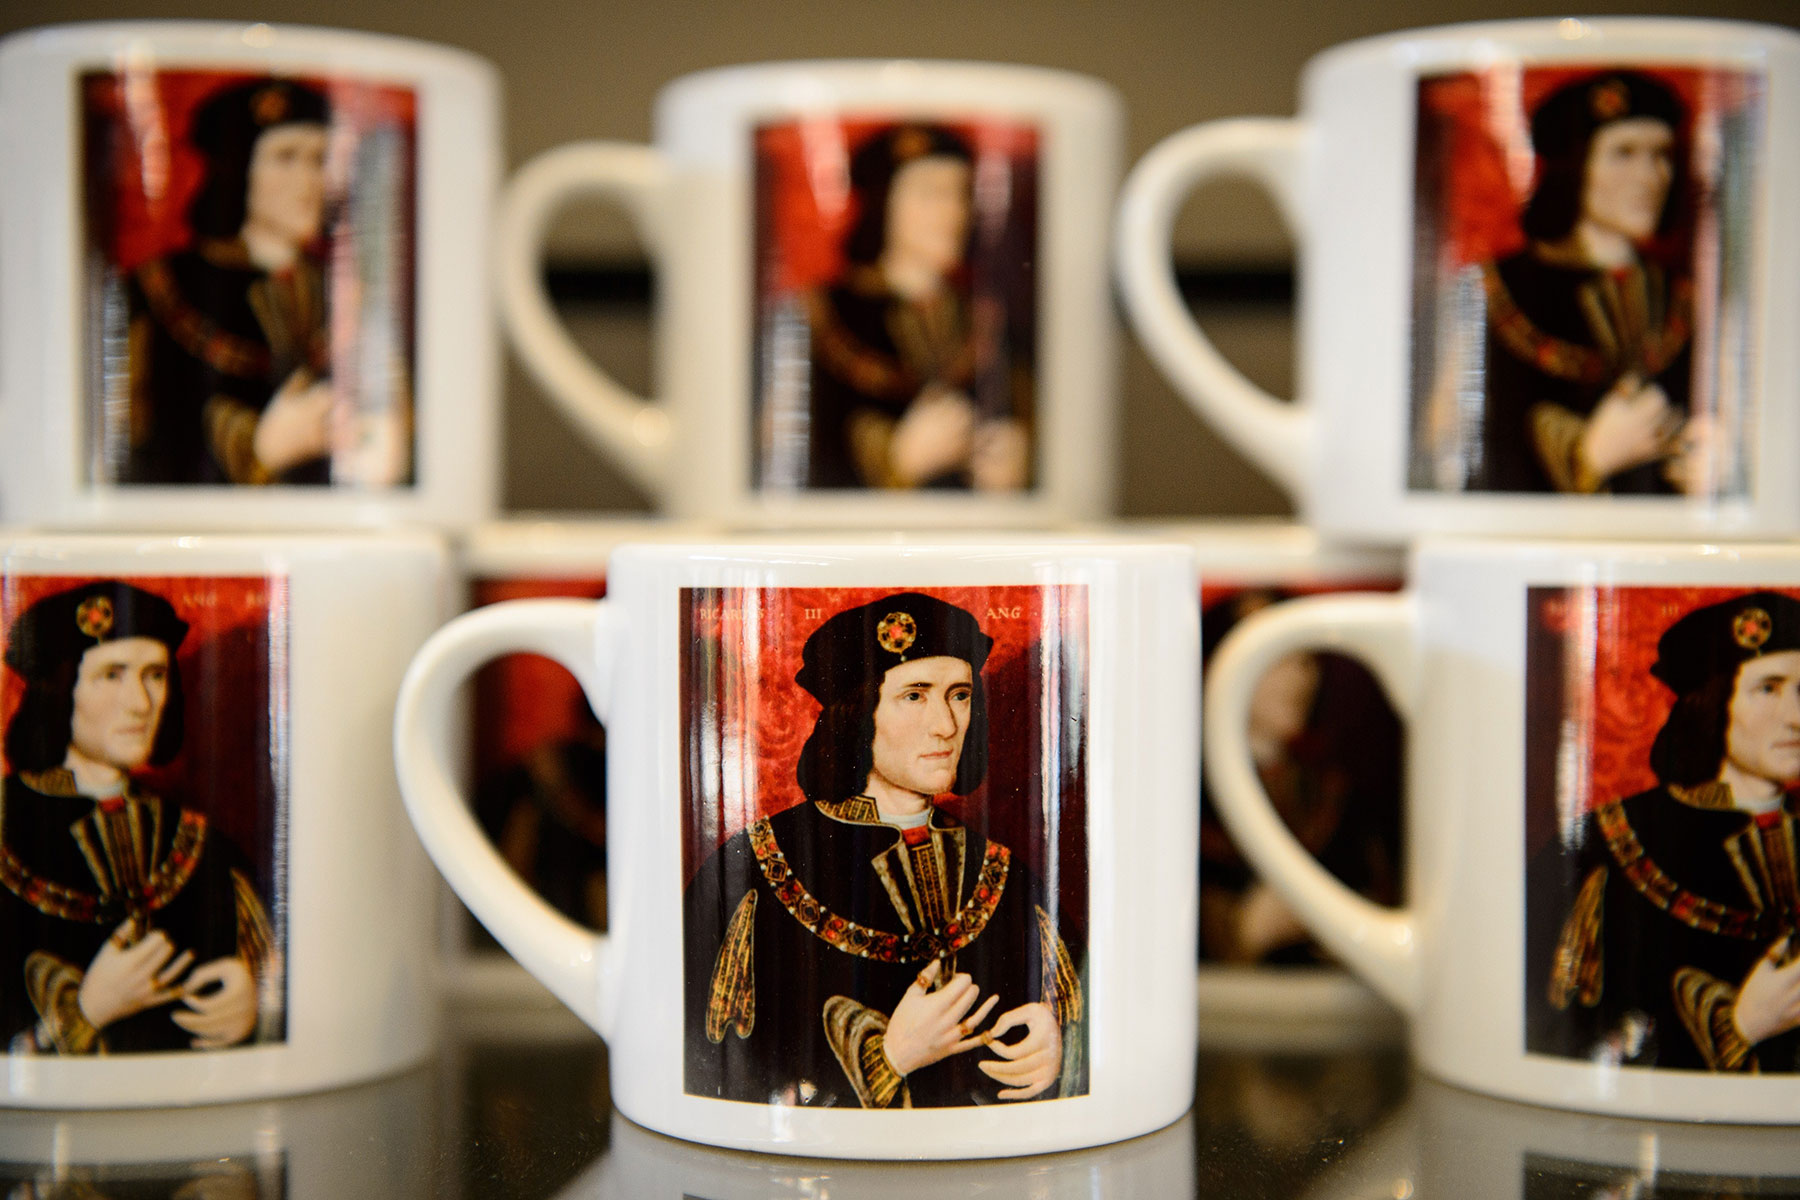 Richard III: A Medieval Relic?